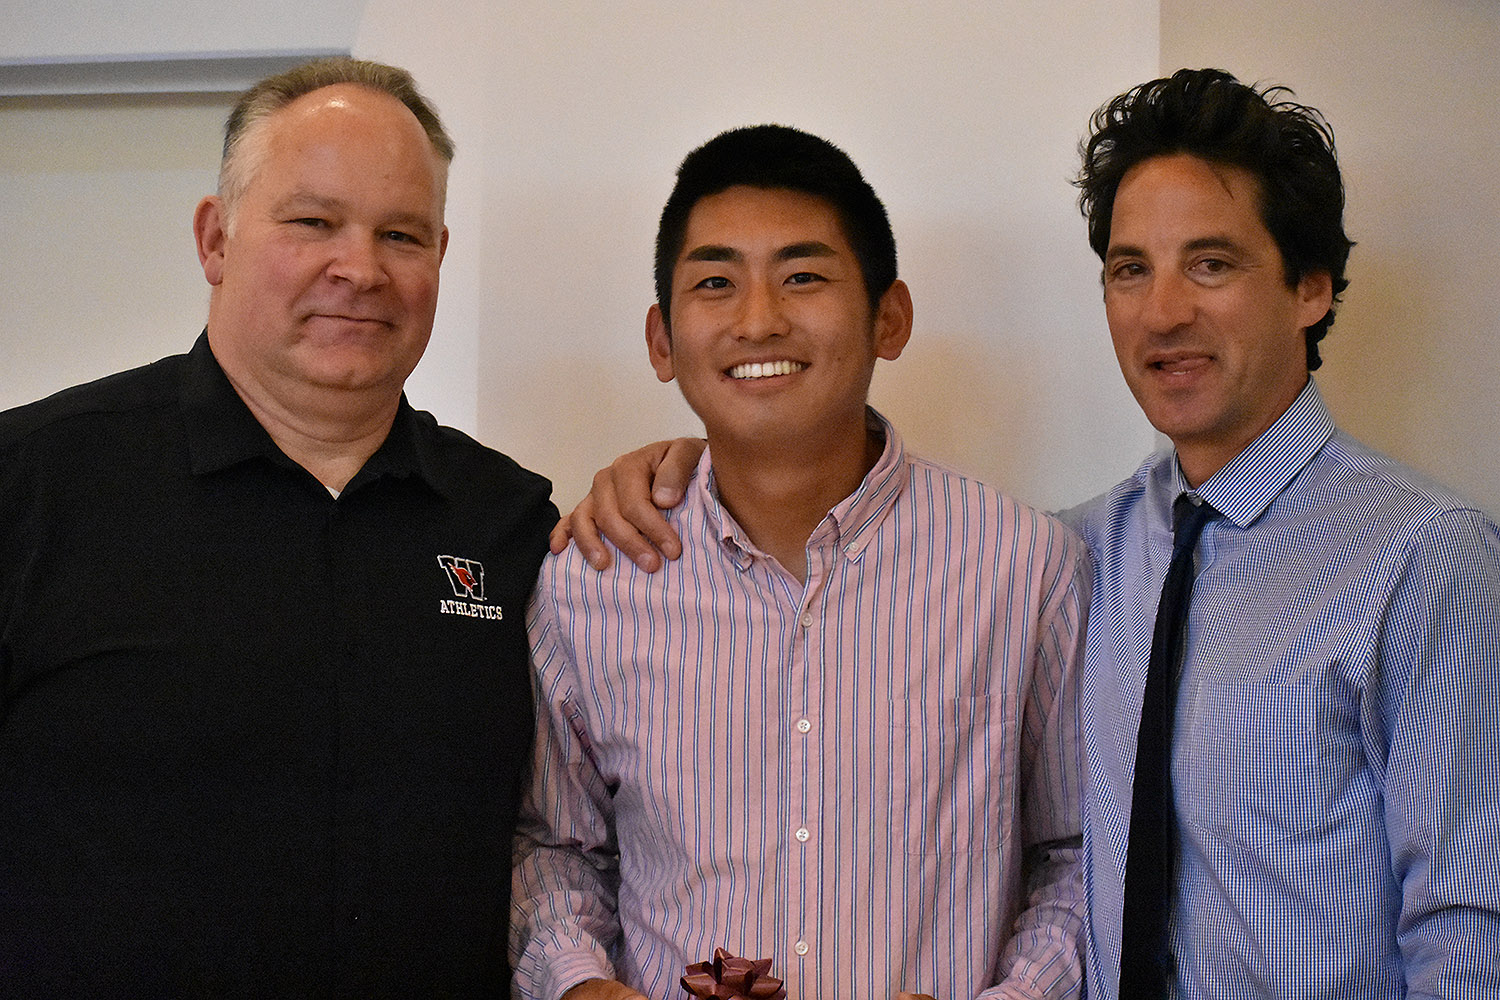 Tennis player Steven Chen '18 received the Maynard Award, which recognizes the top senior male and female scholar-athletes at the university. He is pictured with Whalen, left, and Mike Fried, head tennis coach, right. Along with Julie McDonald '18, Chen was also chosen by the administration to speak on behalf of student-athletes.